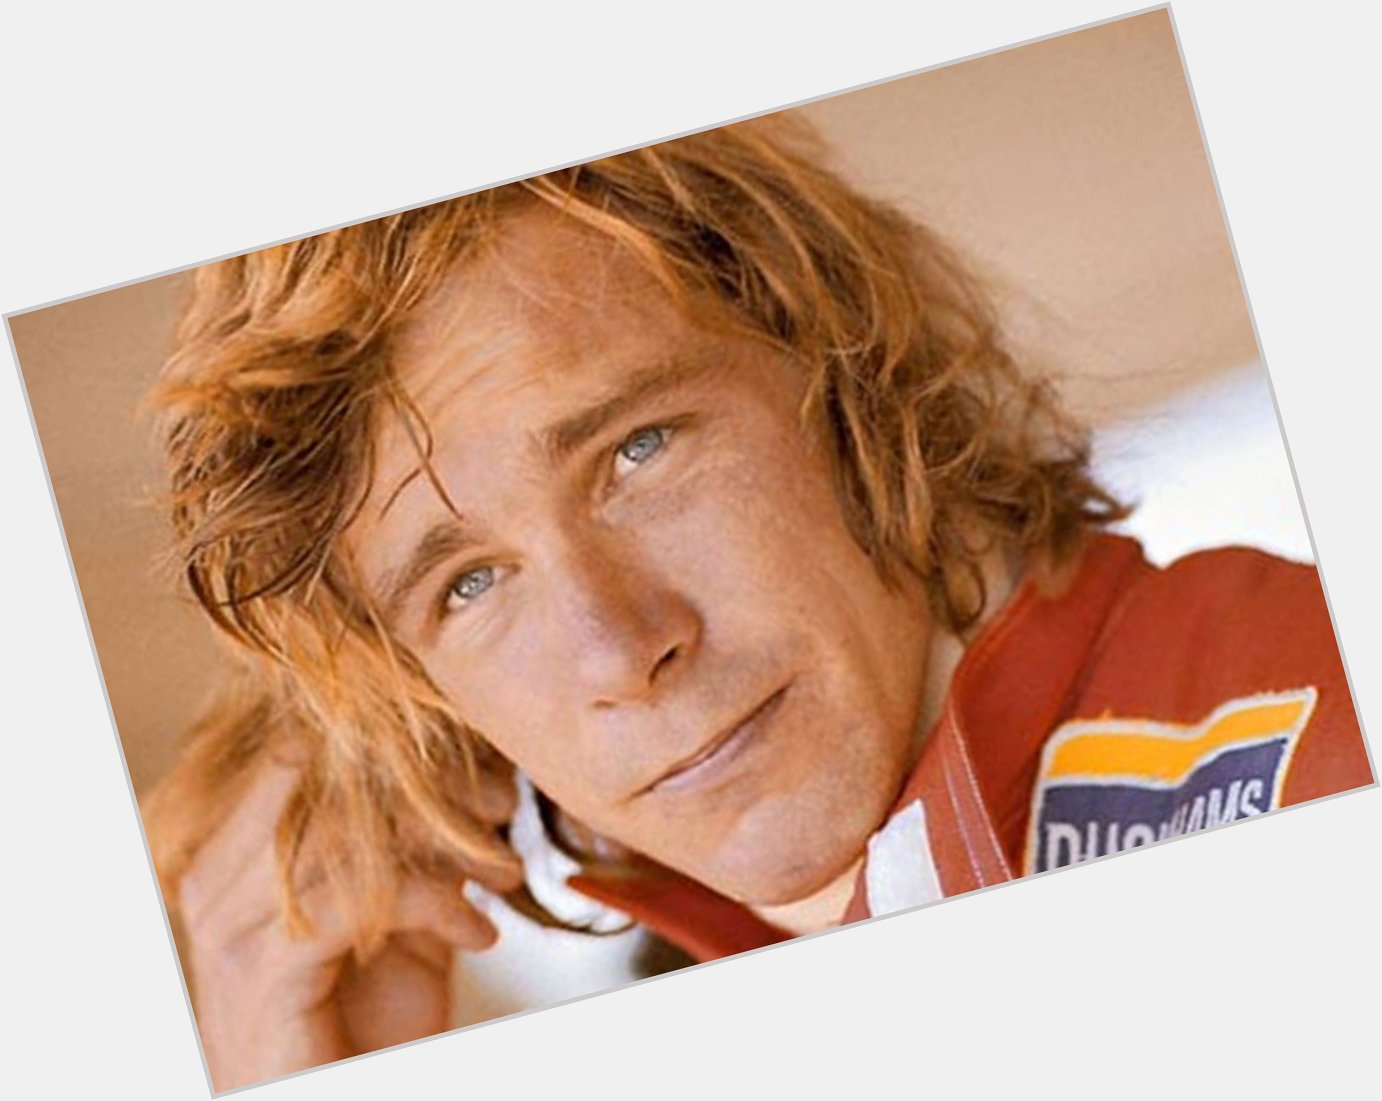 James Hunt would\ve been 69 years old today. Happy birthday to the playboy of 